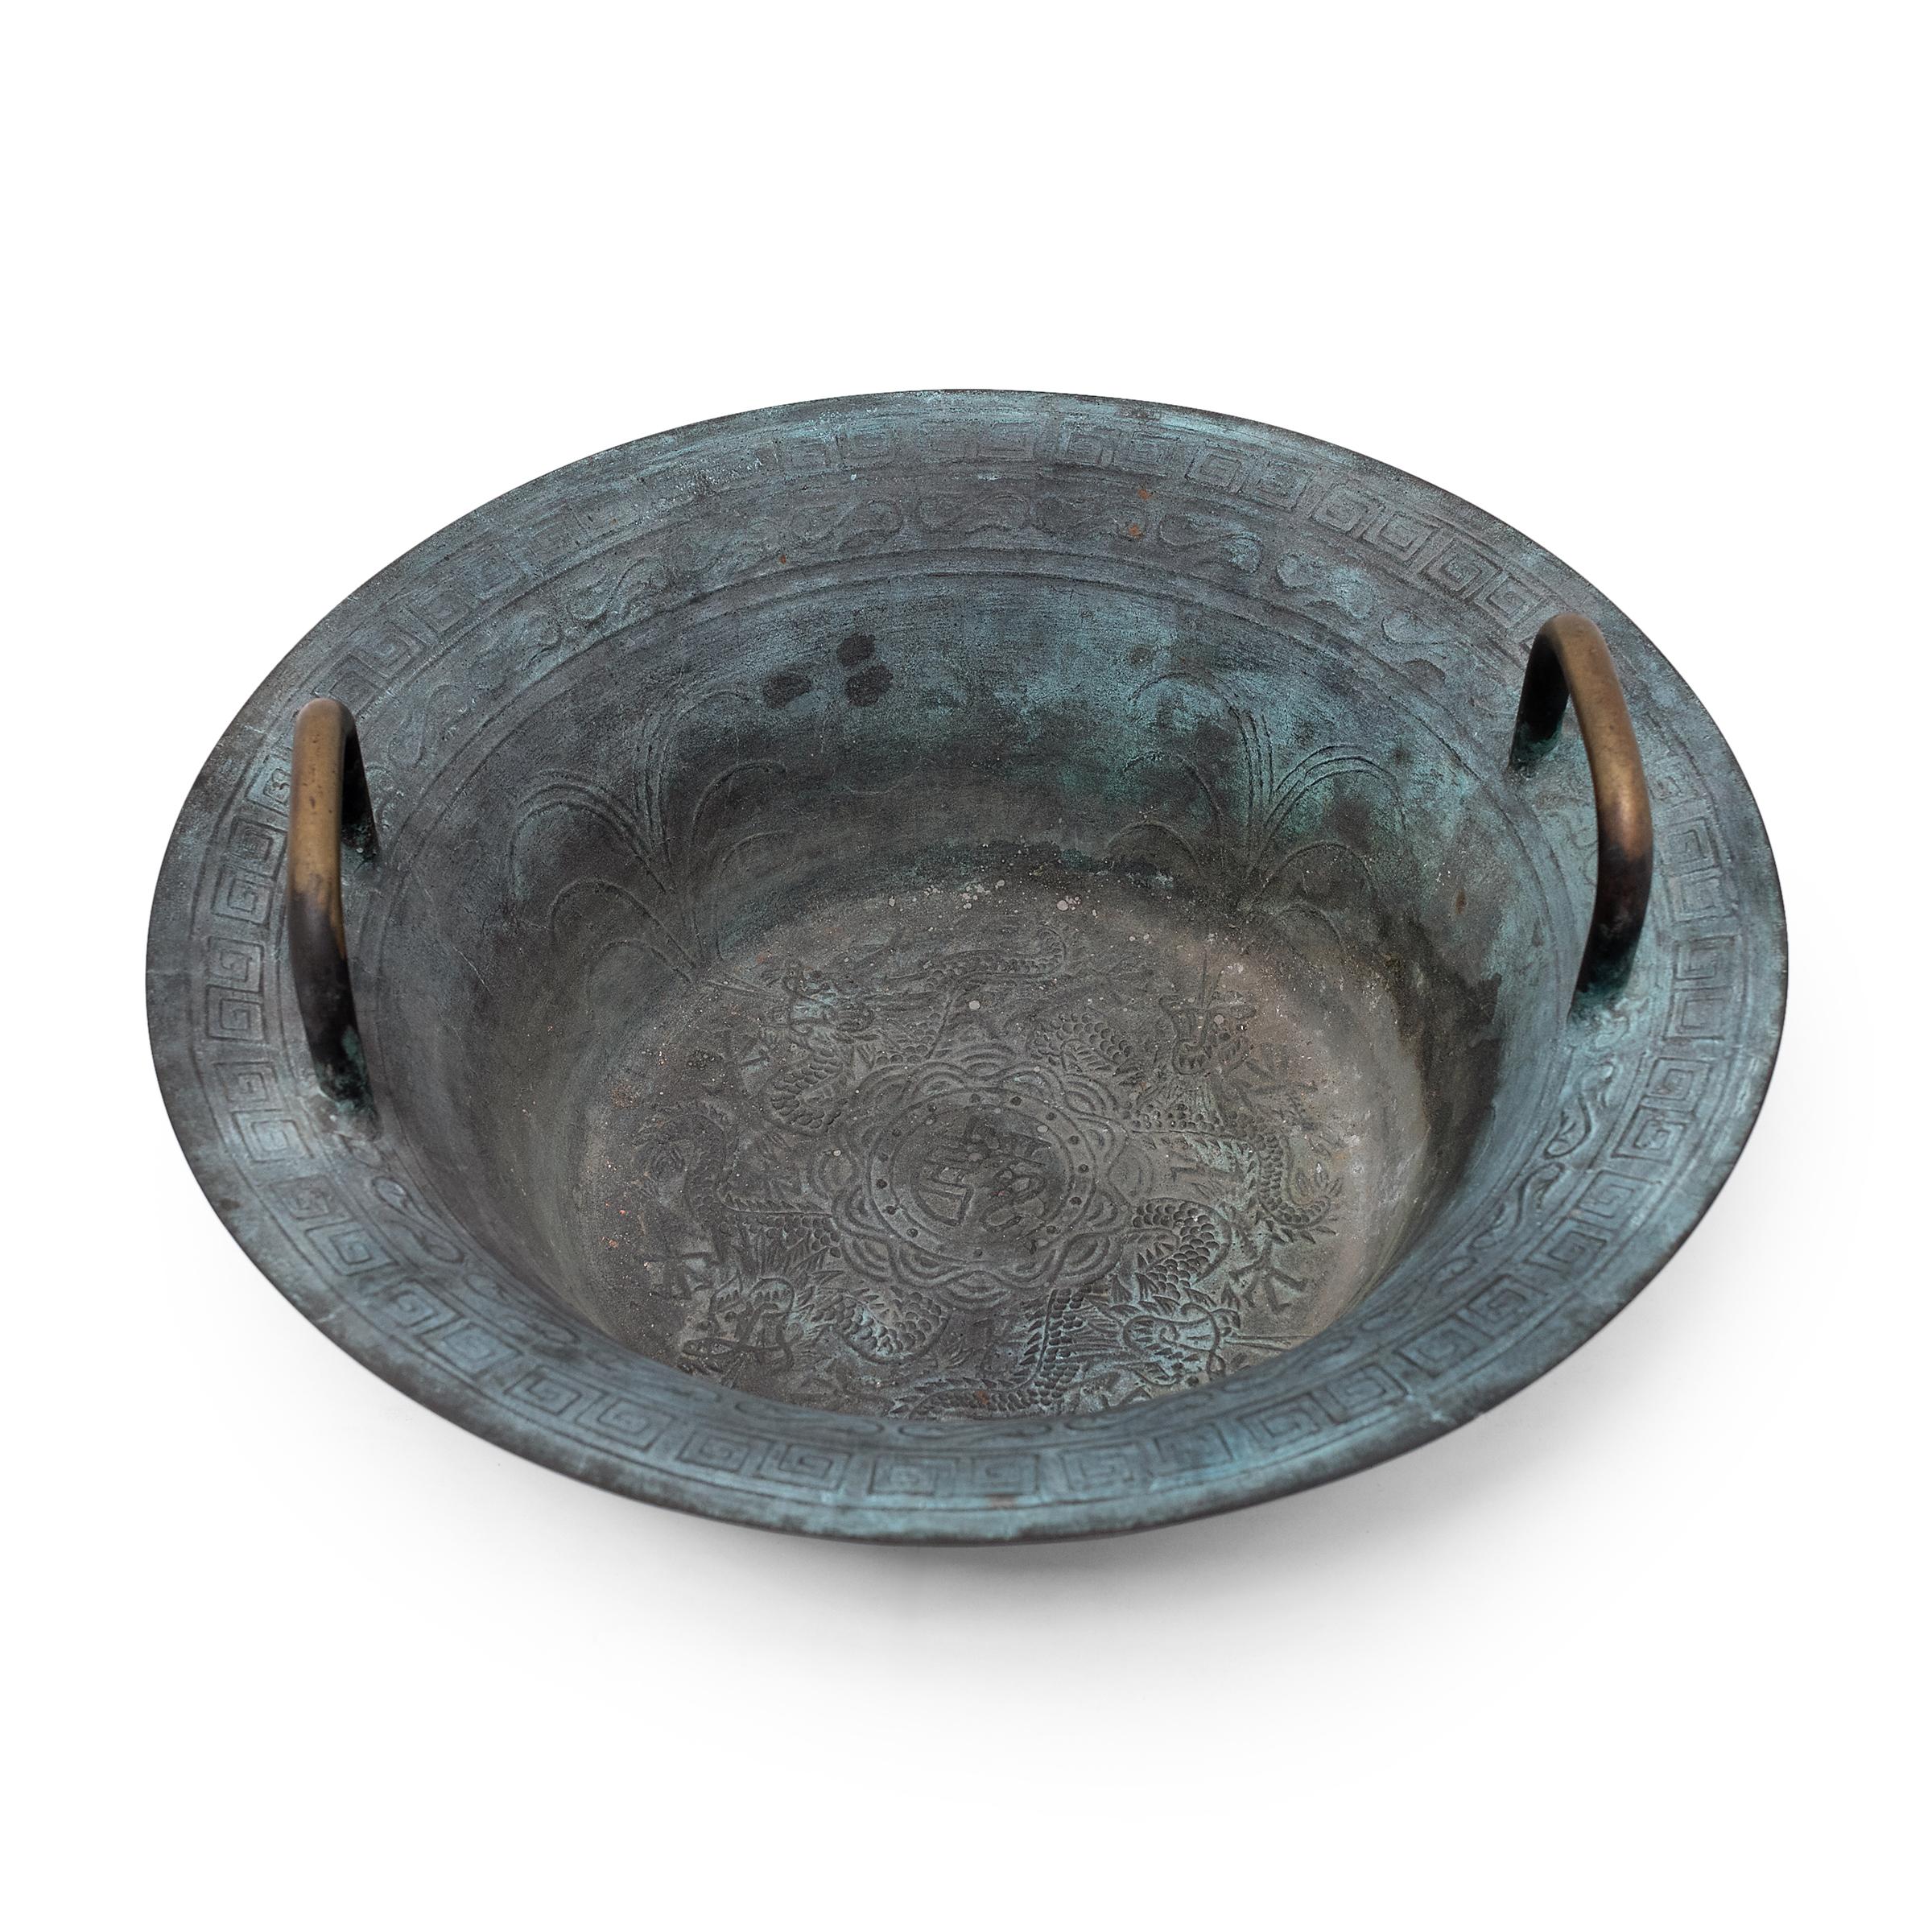 Known as a spouting bowl or resonance bowl, this brass water bowl with handles has a flared shape designed to magnify vibrations moving through its water contents. By rubbing a flat palm back and forth across the handles, the user sends vibrations